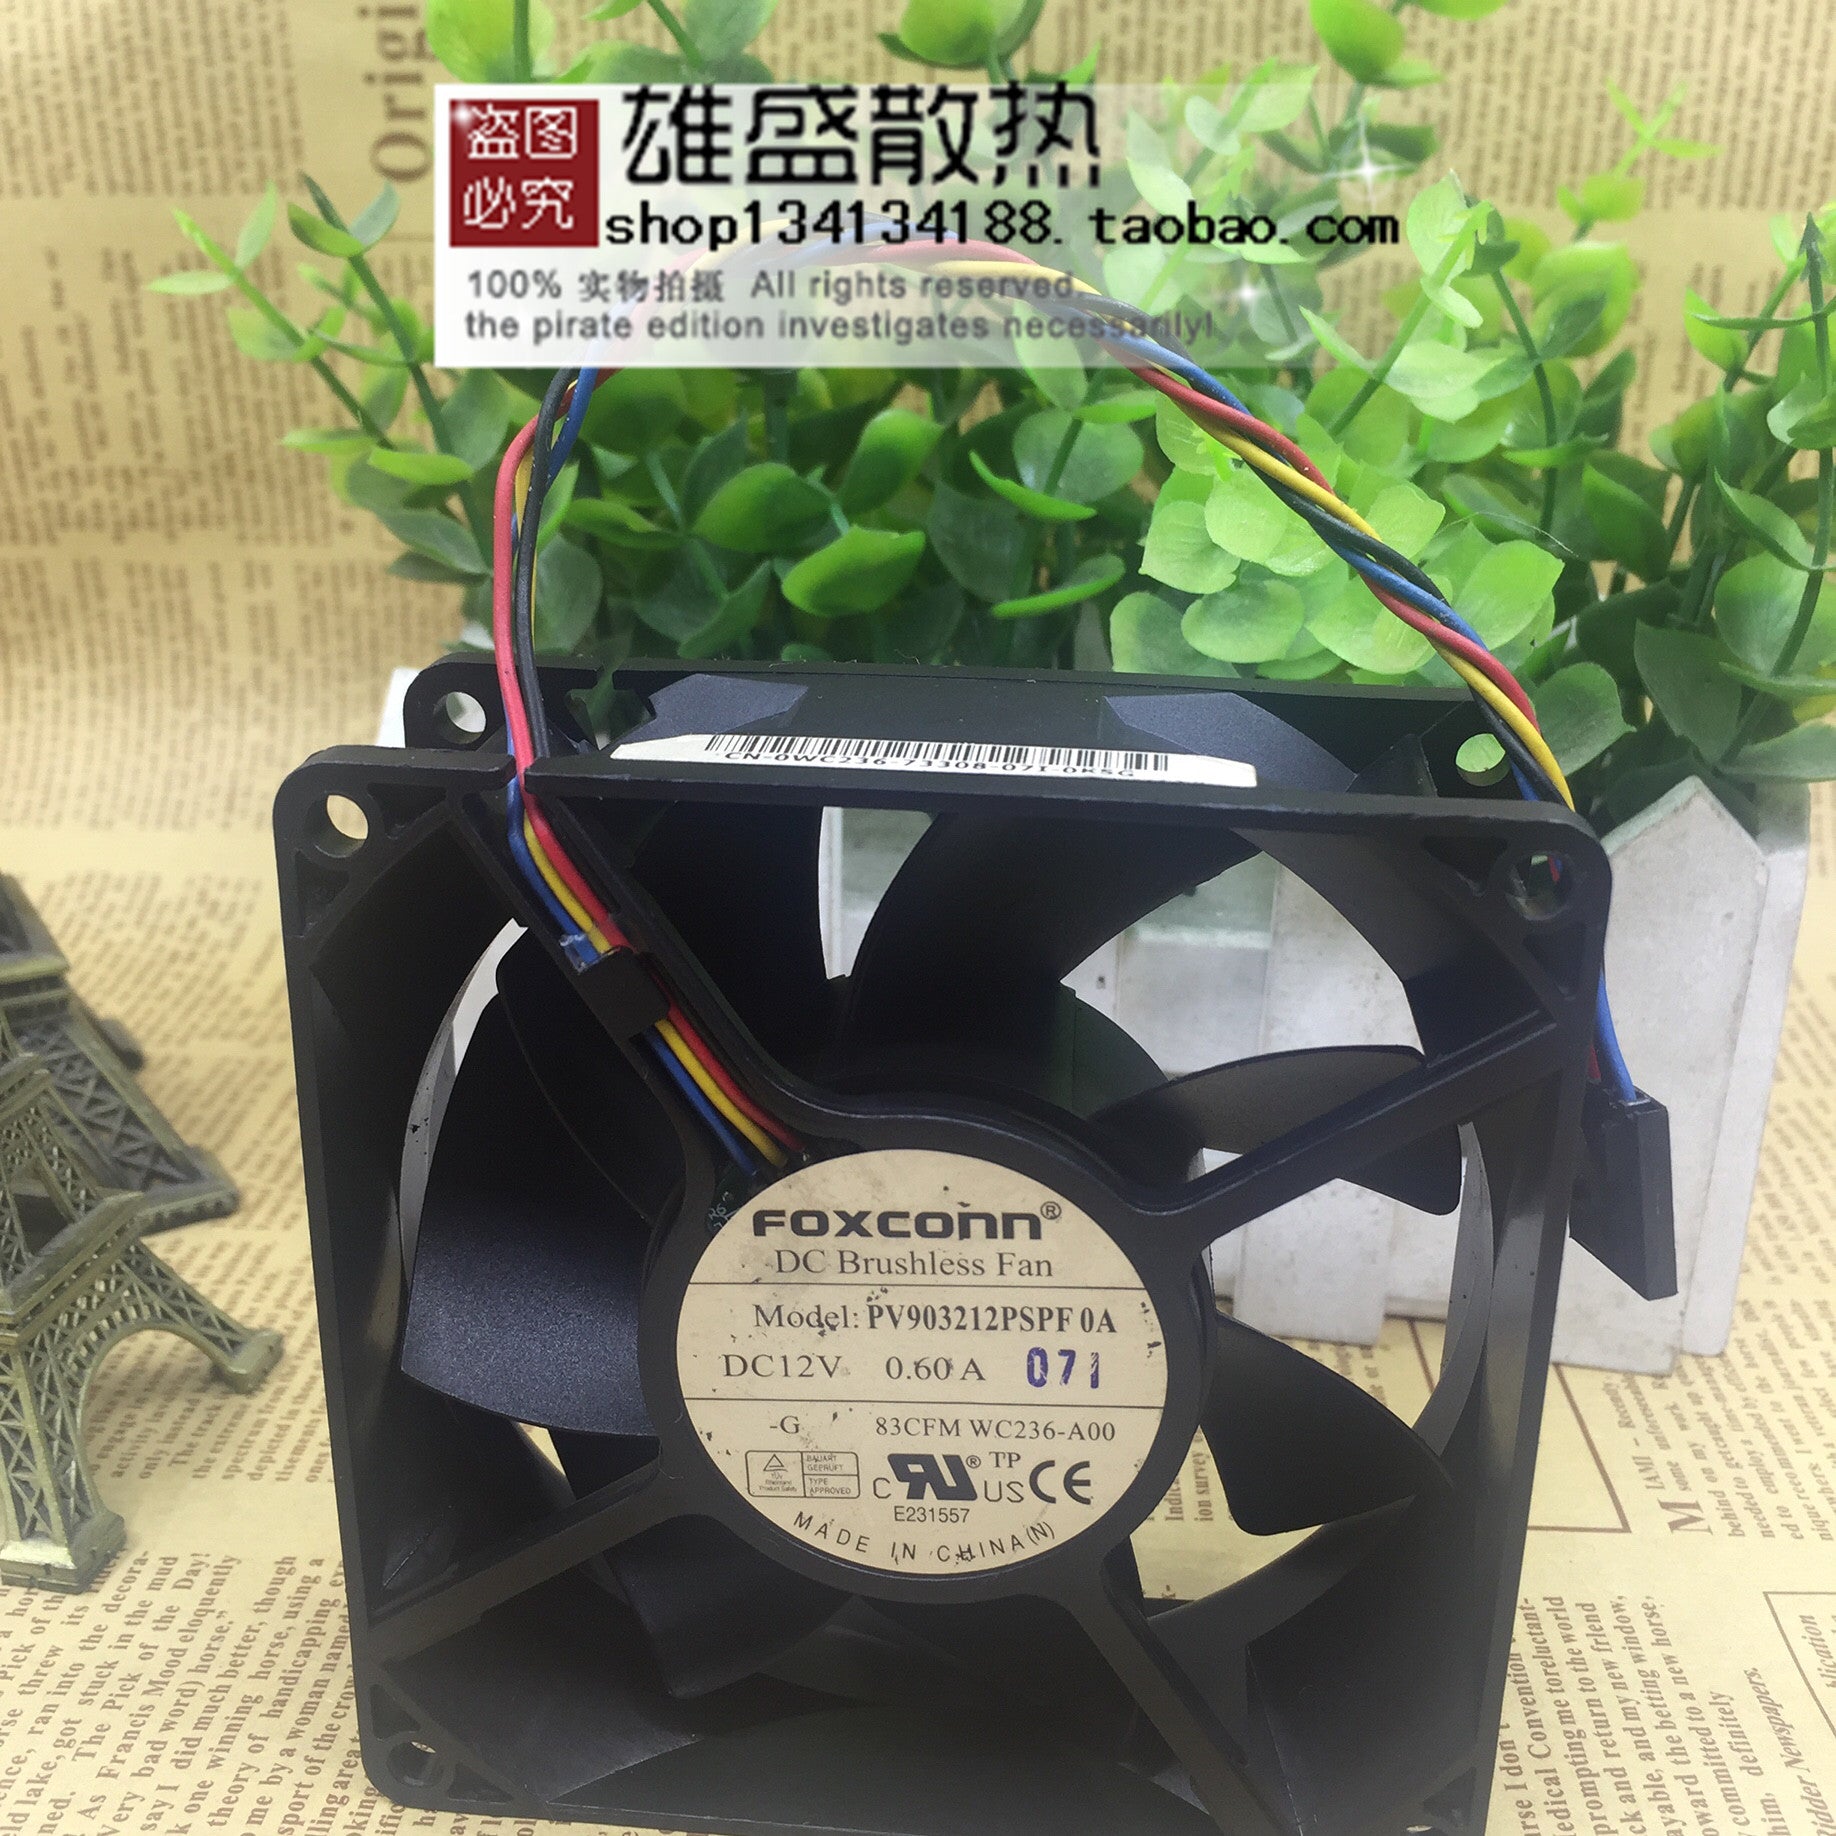 Foxconn 9032 12v0.60a Pv903212pspf0a Silent 4-Wire PWM Temperature Control Case Cooling Fan